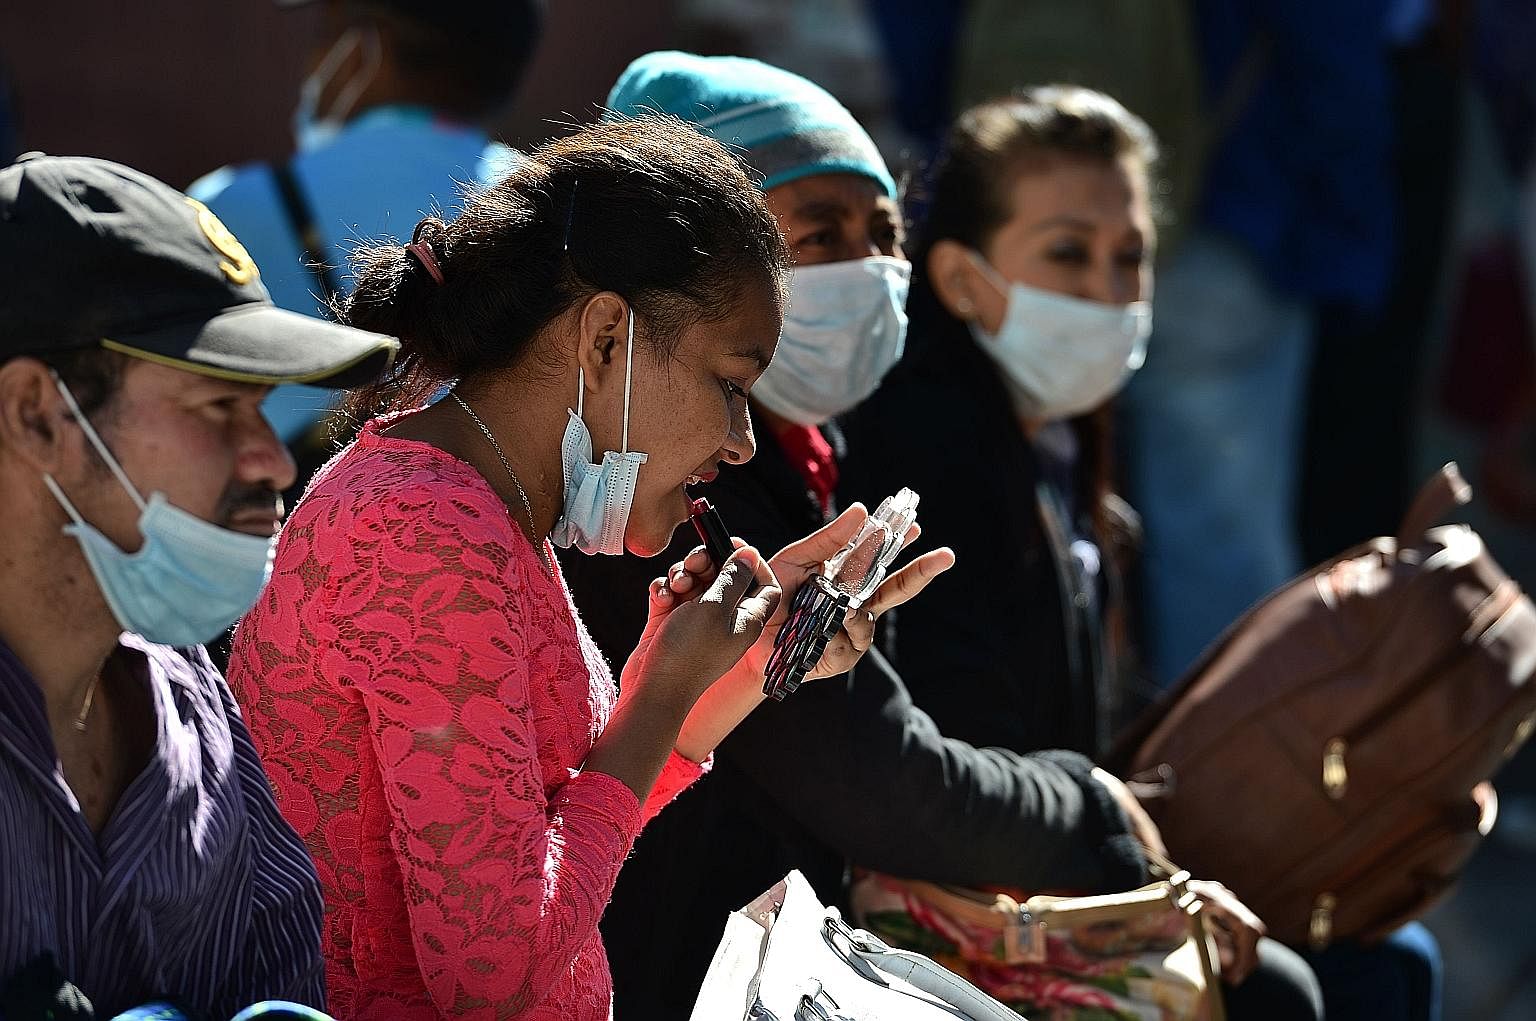 A woman applying lipstick next to people wearing face masks amid the coronavirus outbreak, in Tegucigalpa, Honduras, in March. With face coverings an inevitable part of our essential attire for some time to come at least, some are wondering about the